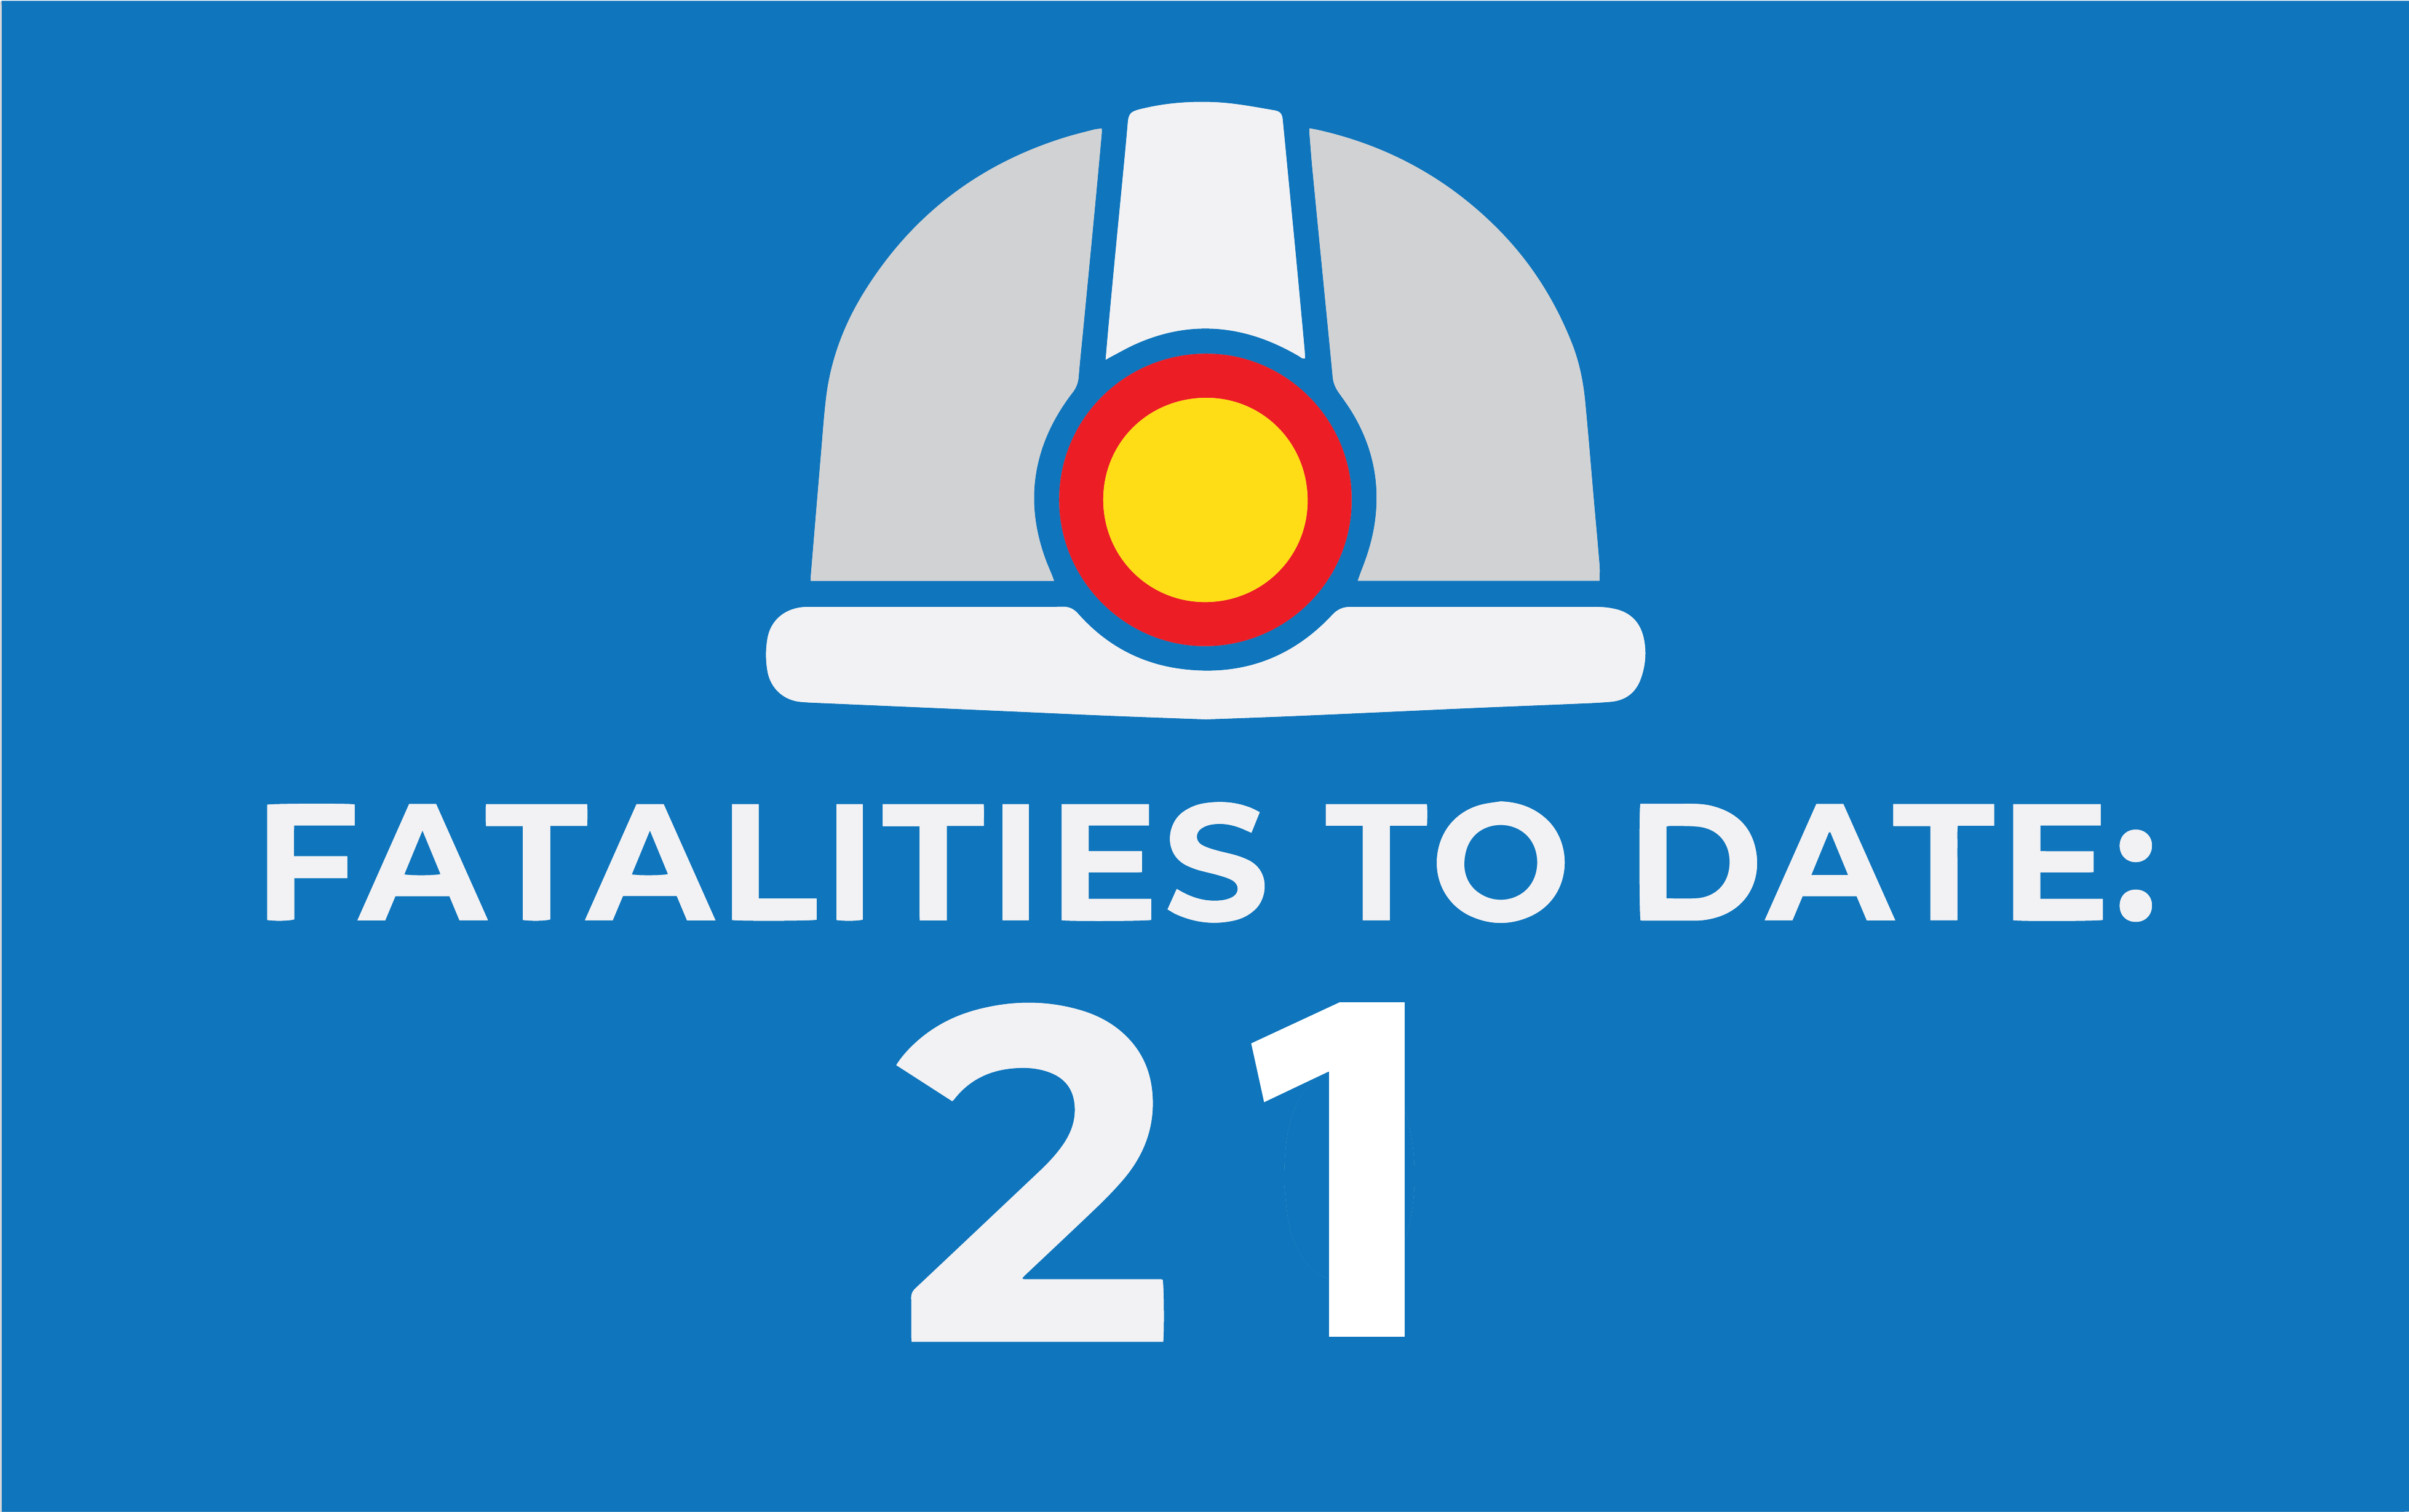 MSHA's fatality logo depicting current number of fatalities to date.